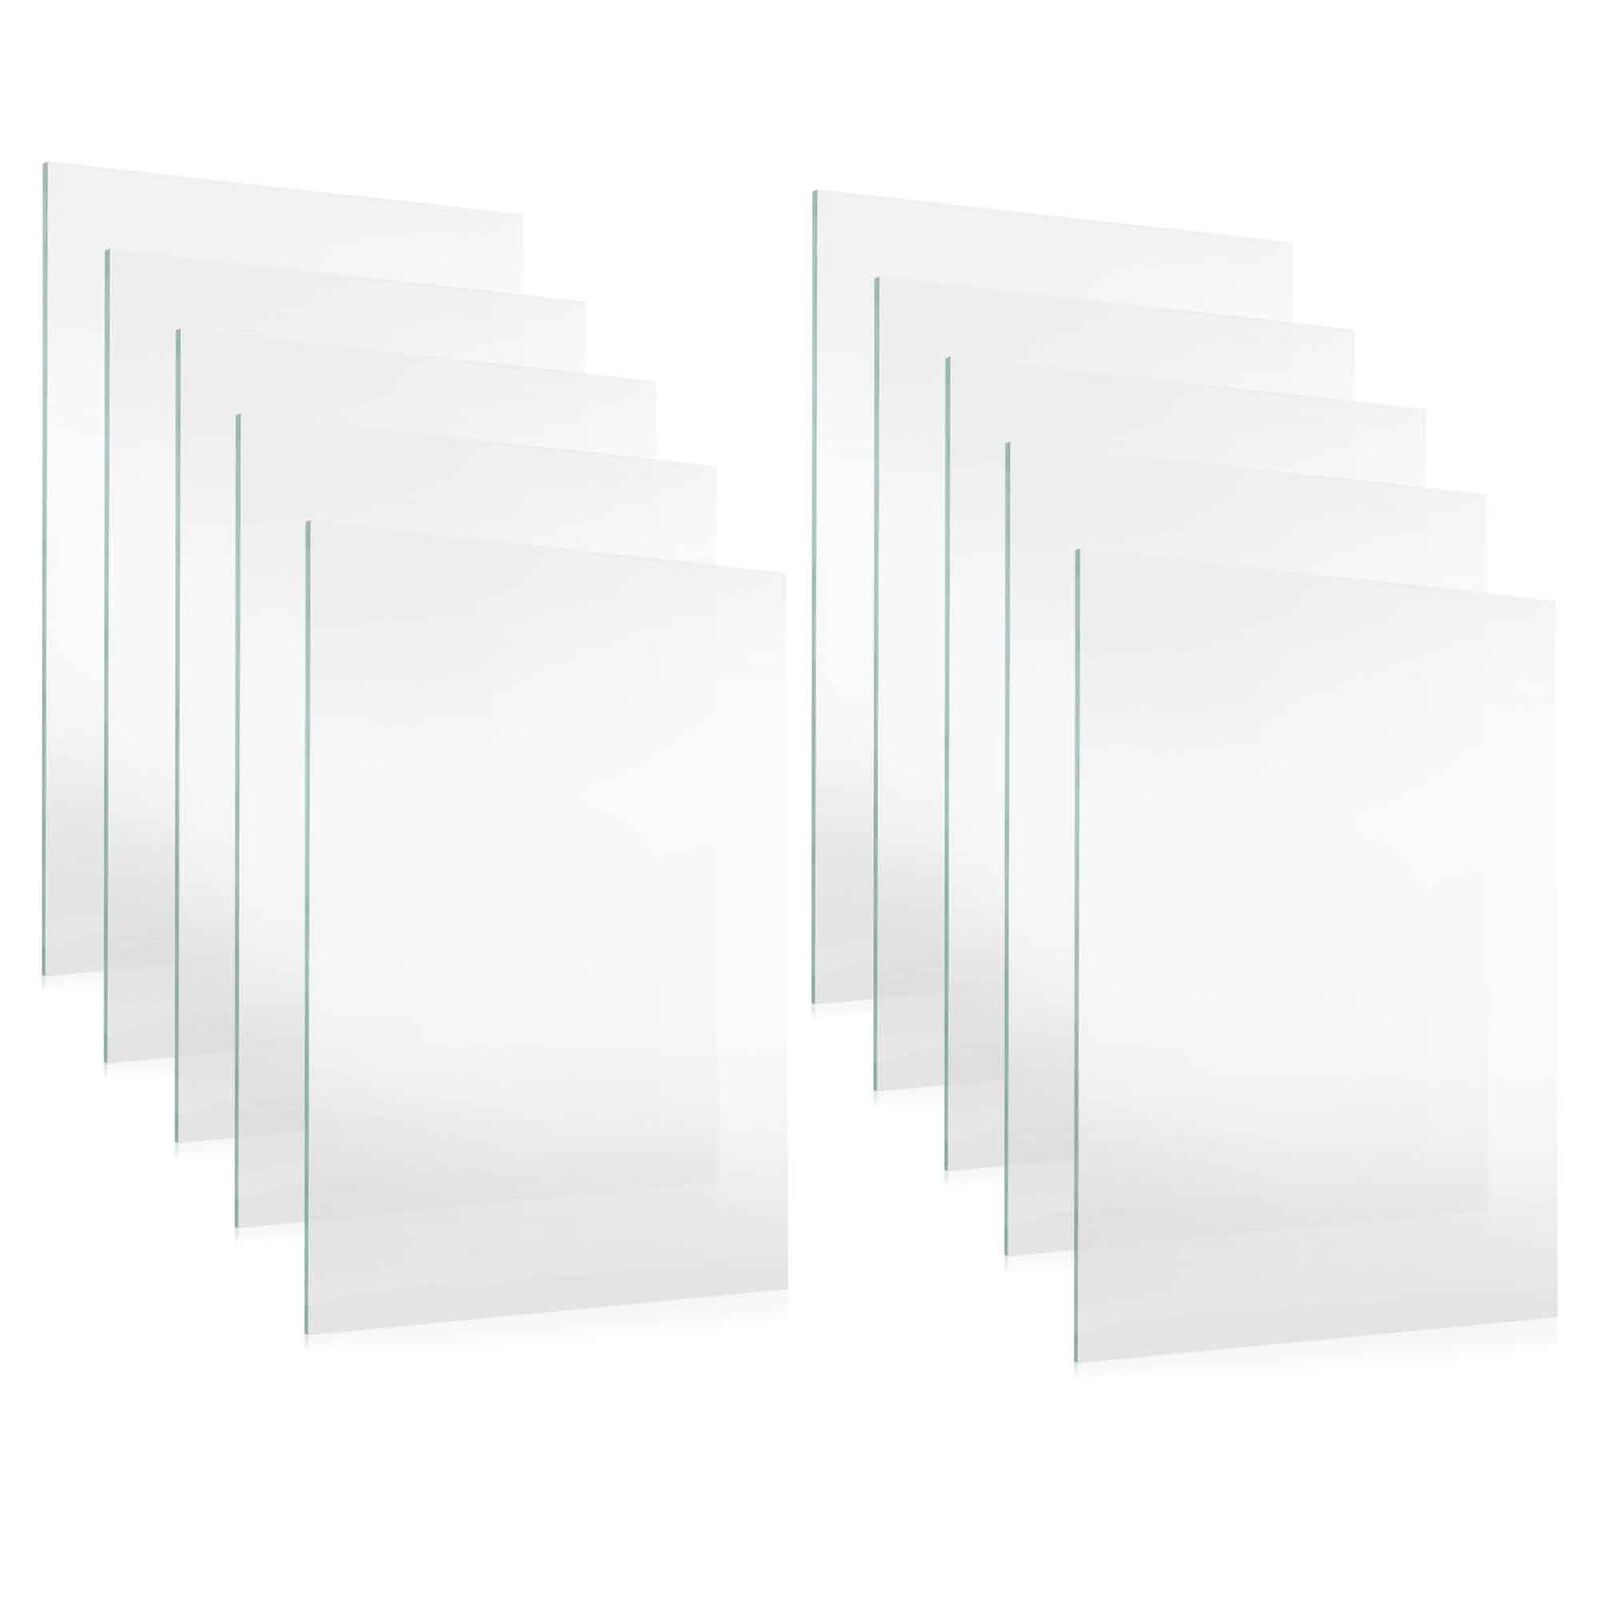 10 Sheets Of Non-Glare UV-Resistant Frame-Grade Acrylic Replacement for 22x22